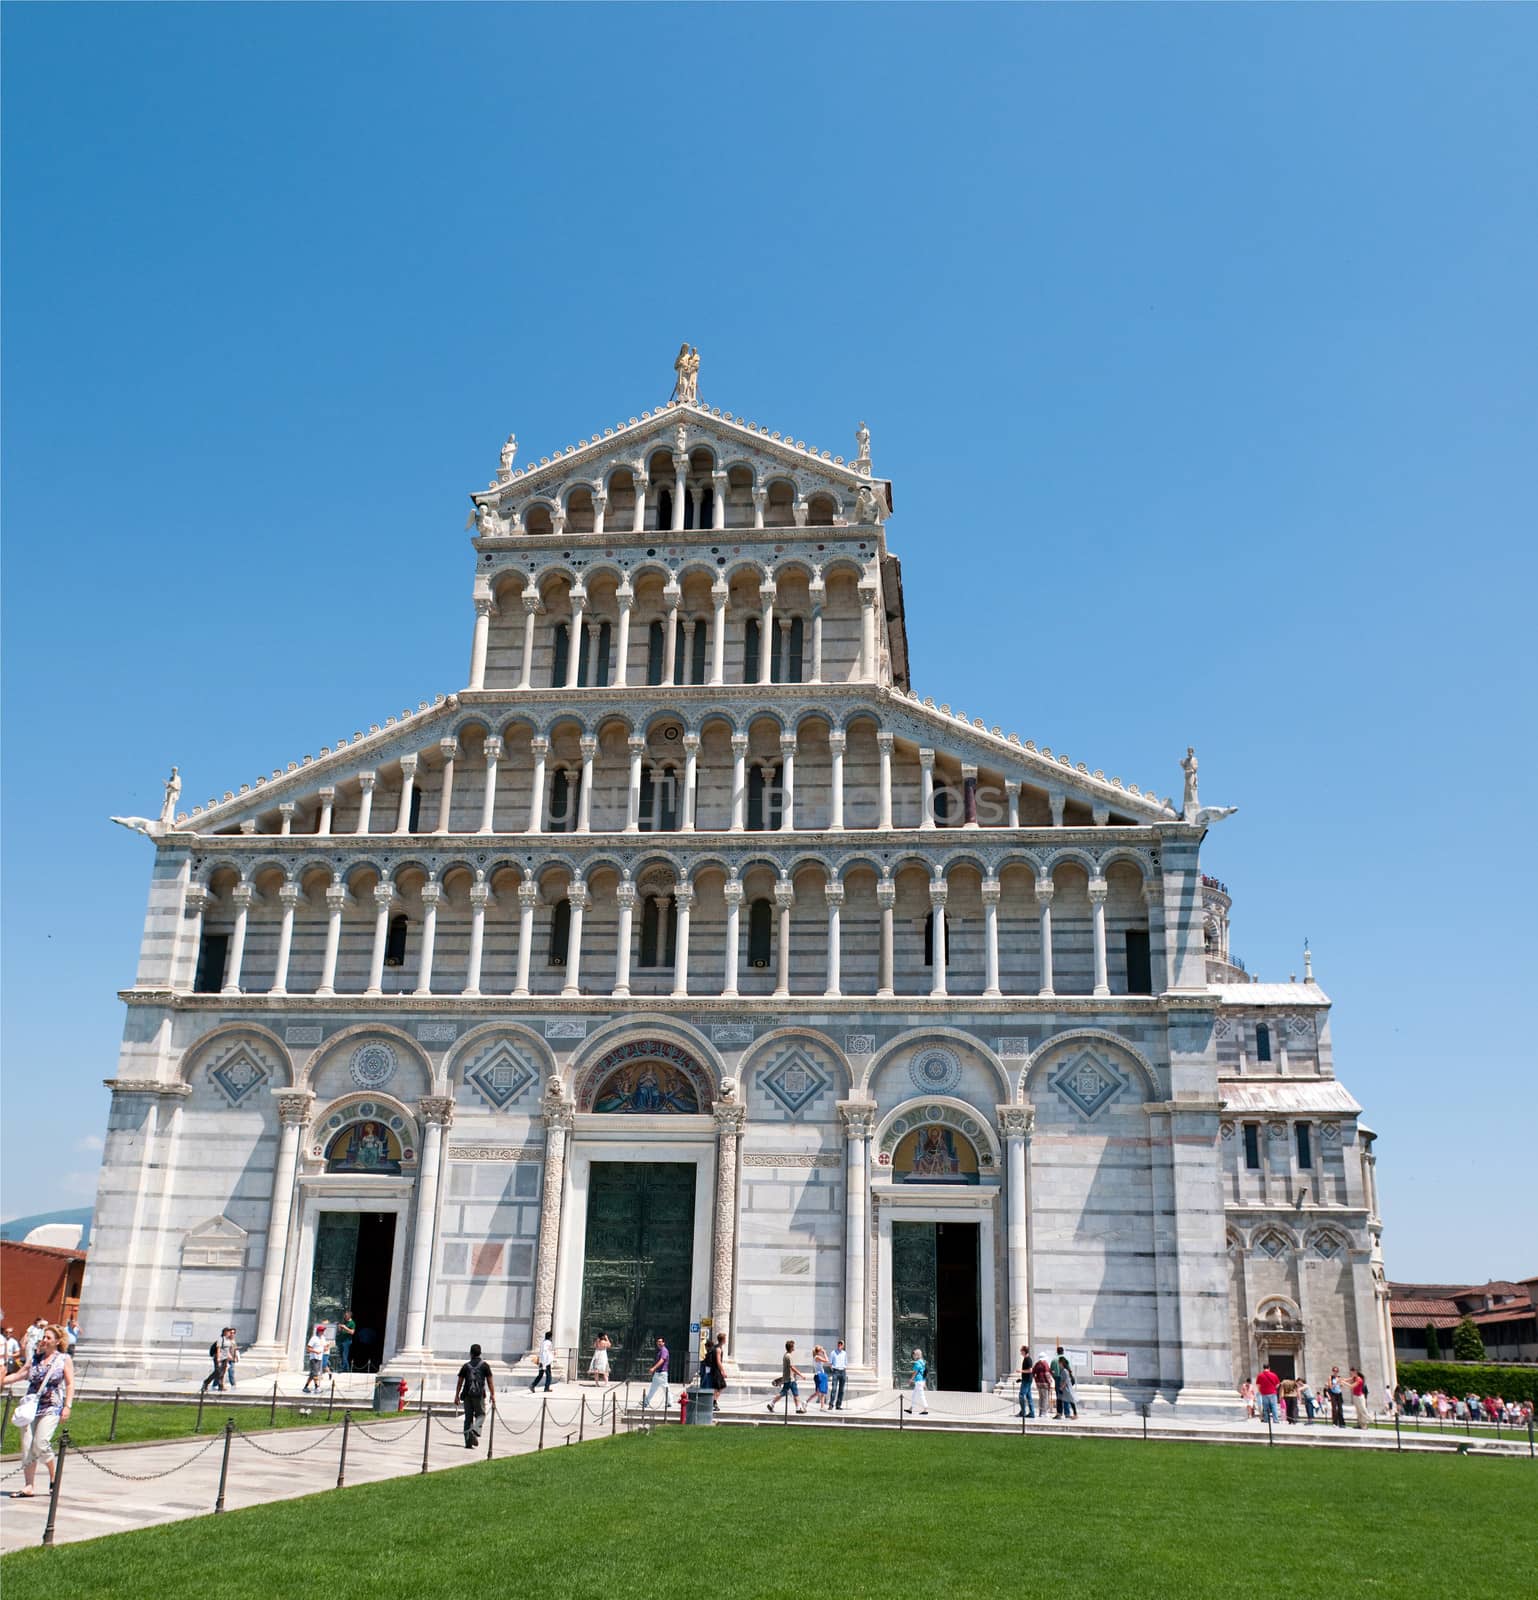 Crowds of tourists visit the Cathedral of Pisa. Piazza dei miracoli, Pisa, Italy.